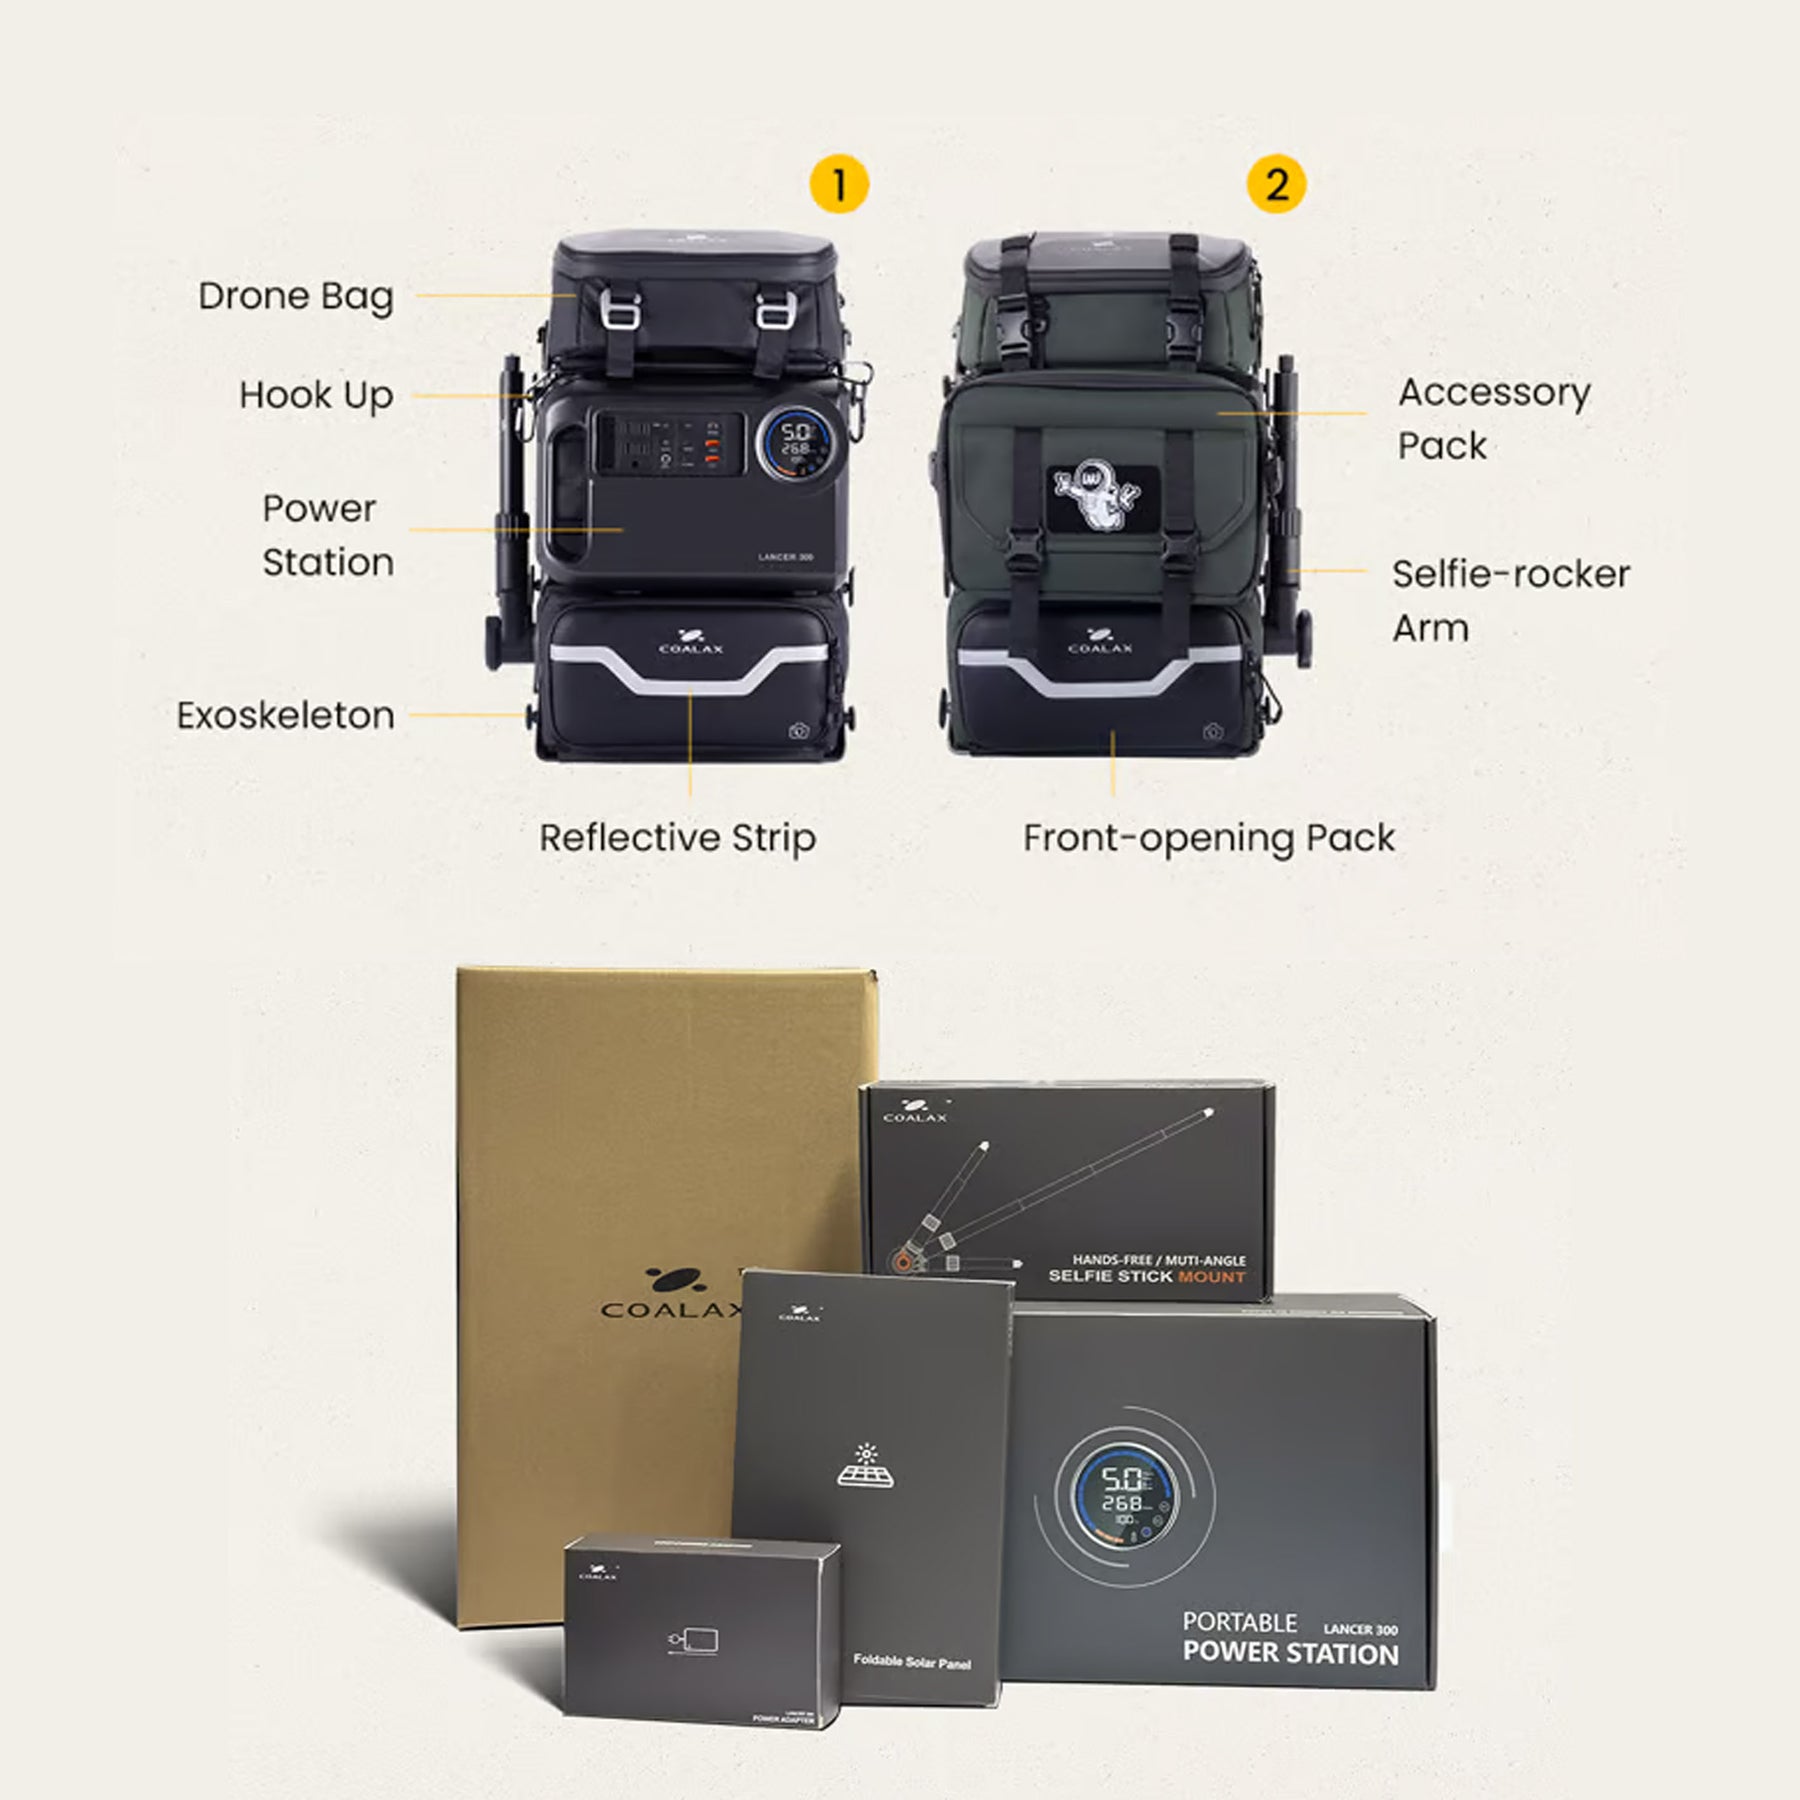 Pre-order Lancer 300 - Modular Backpack with Power and Selfie Stick